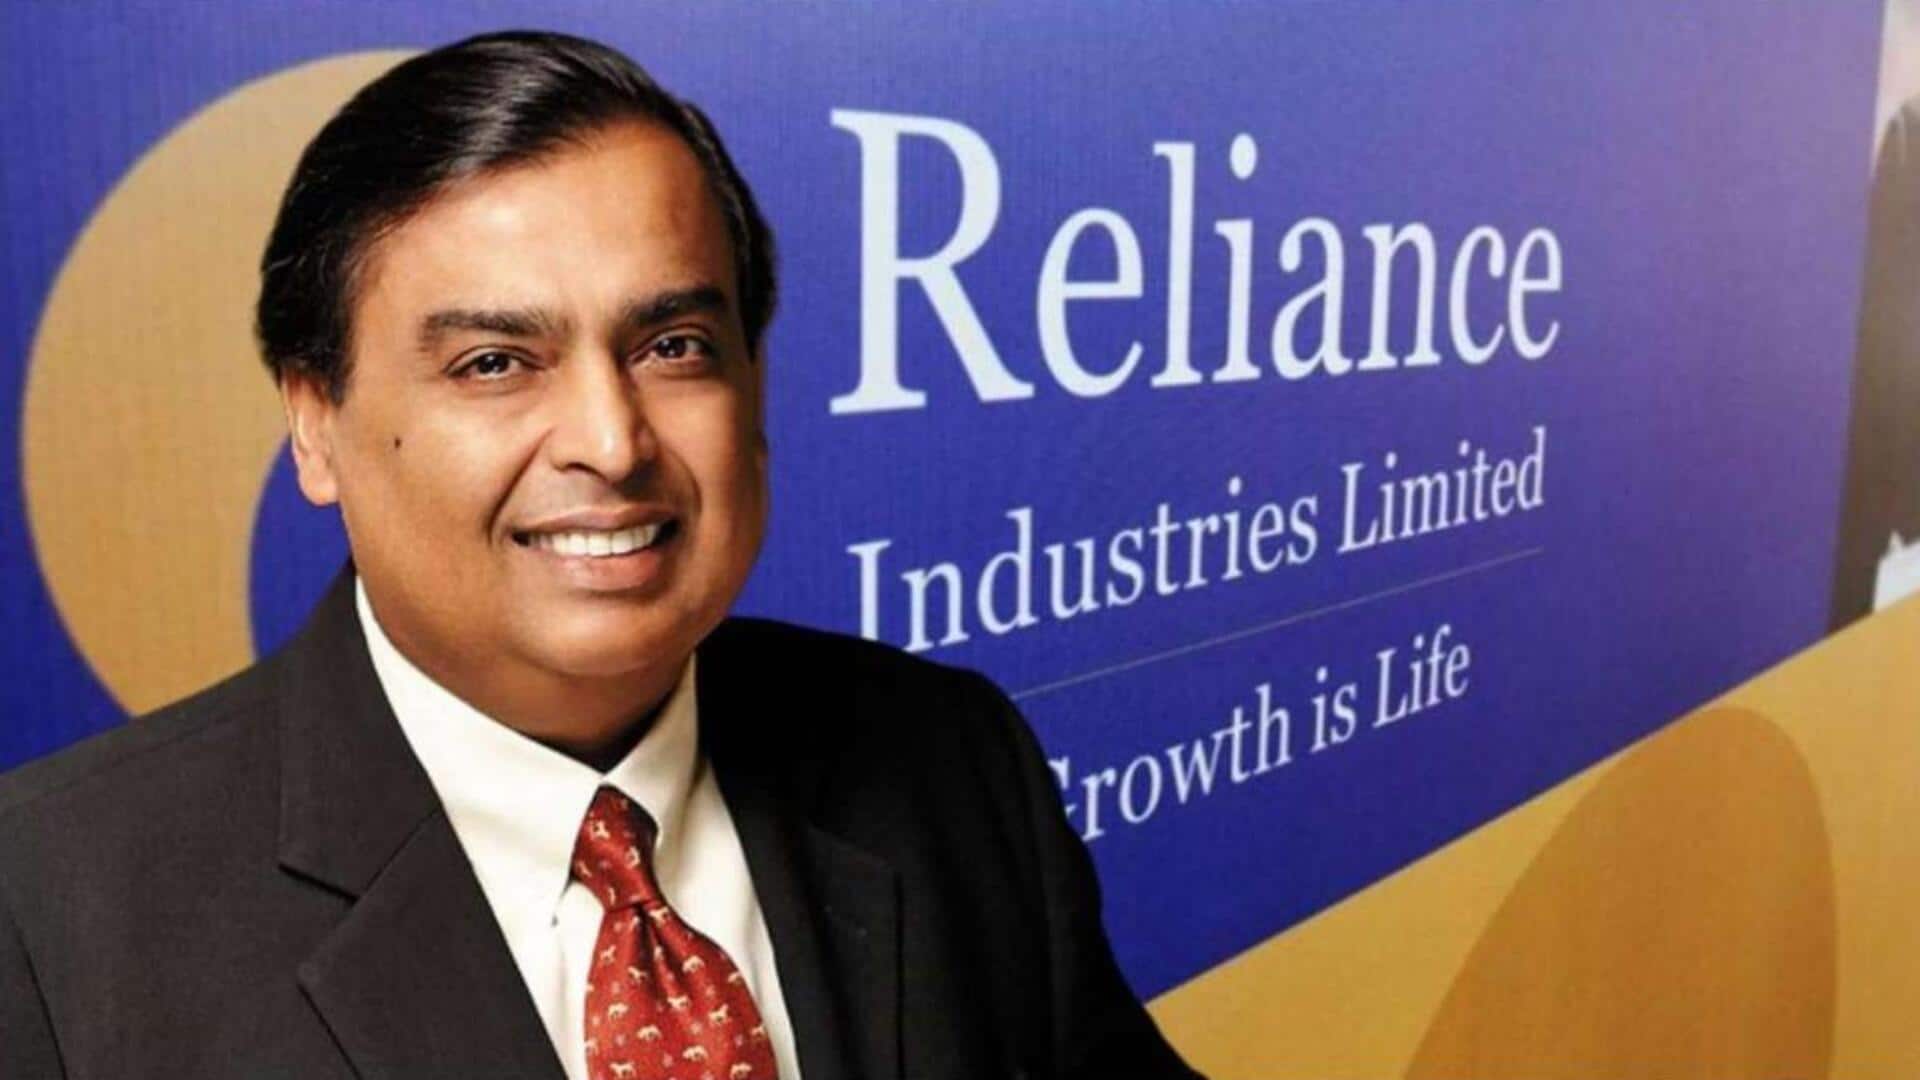 Reliance Industries, Jio, and Retail's Q3 results out: Details here